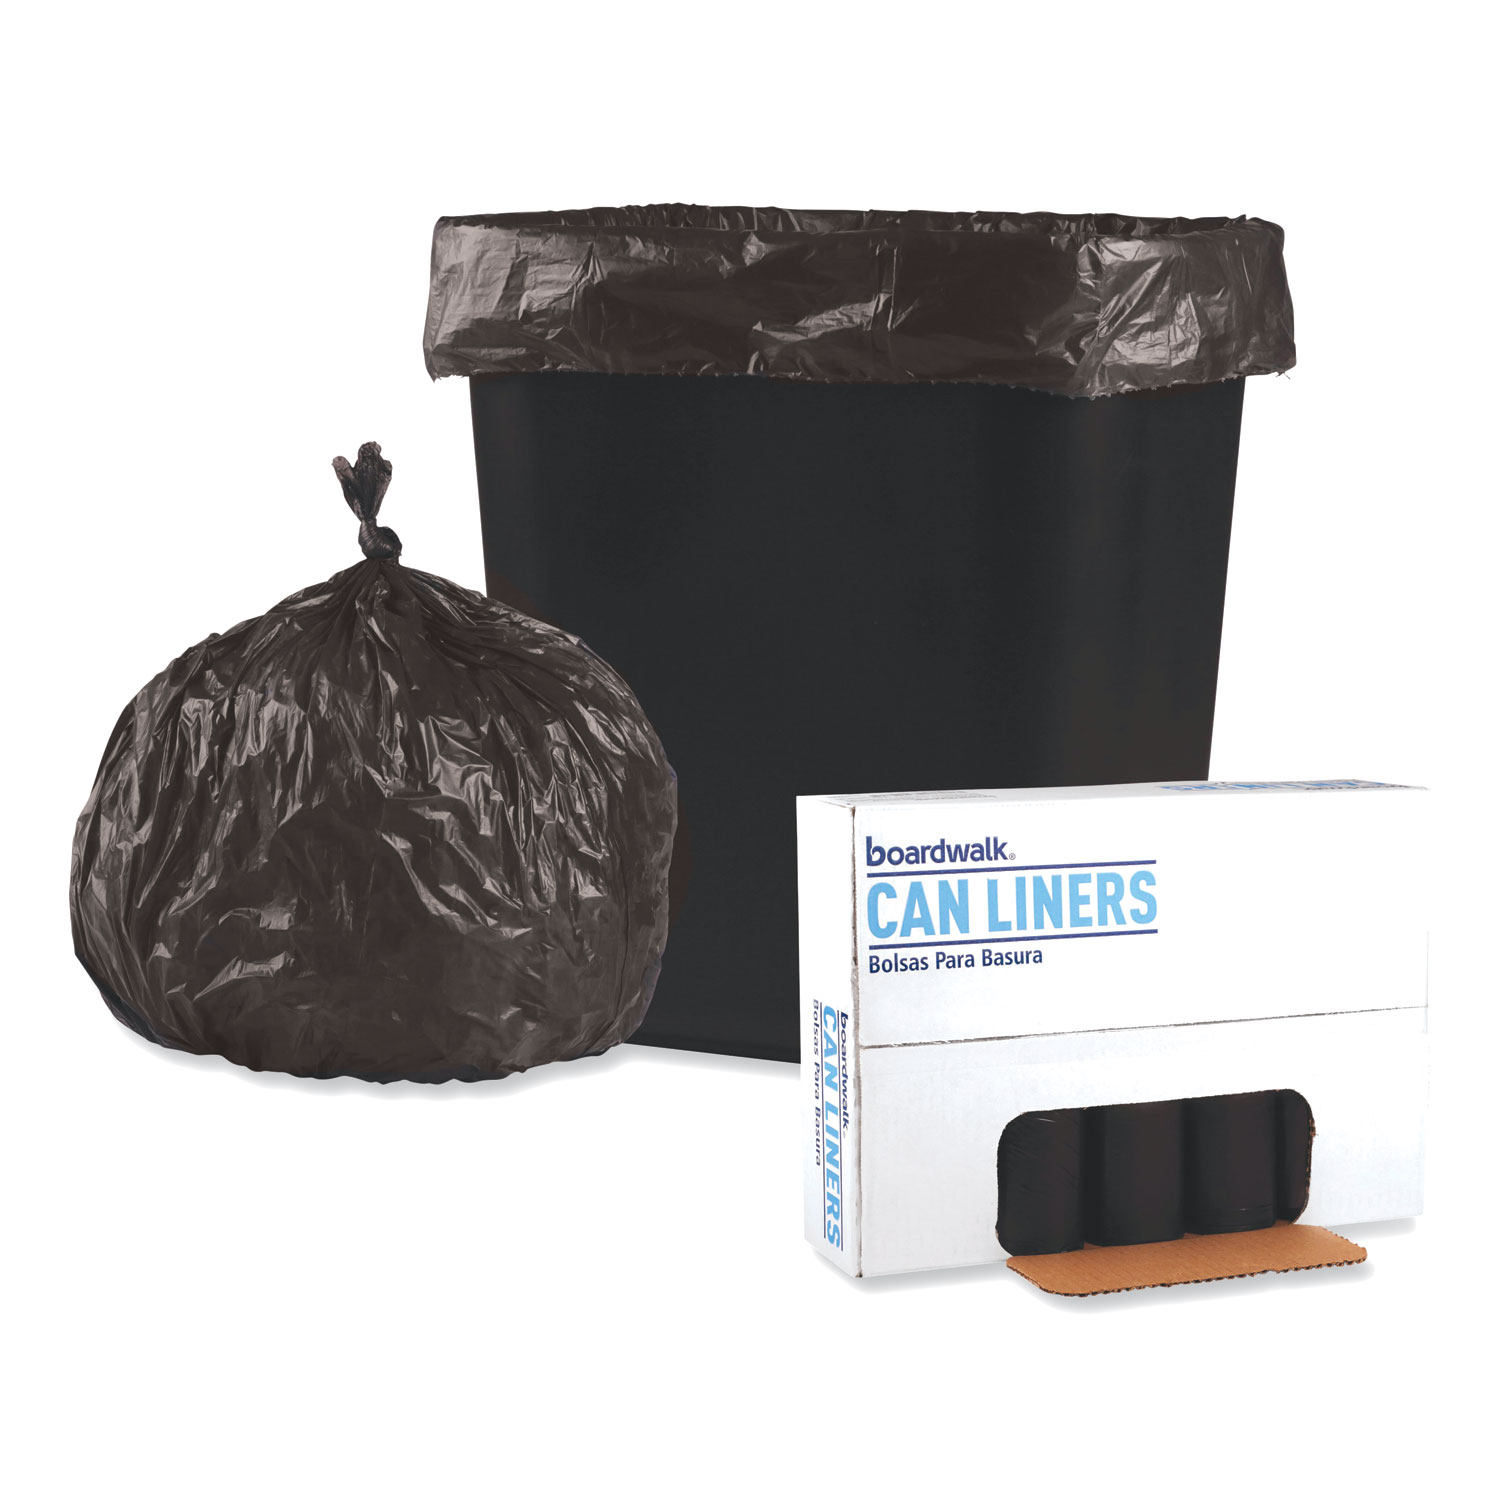 Pack of 25 Black Trash Bags 38x60 Thickness 17 Mic Low Density